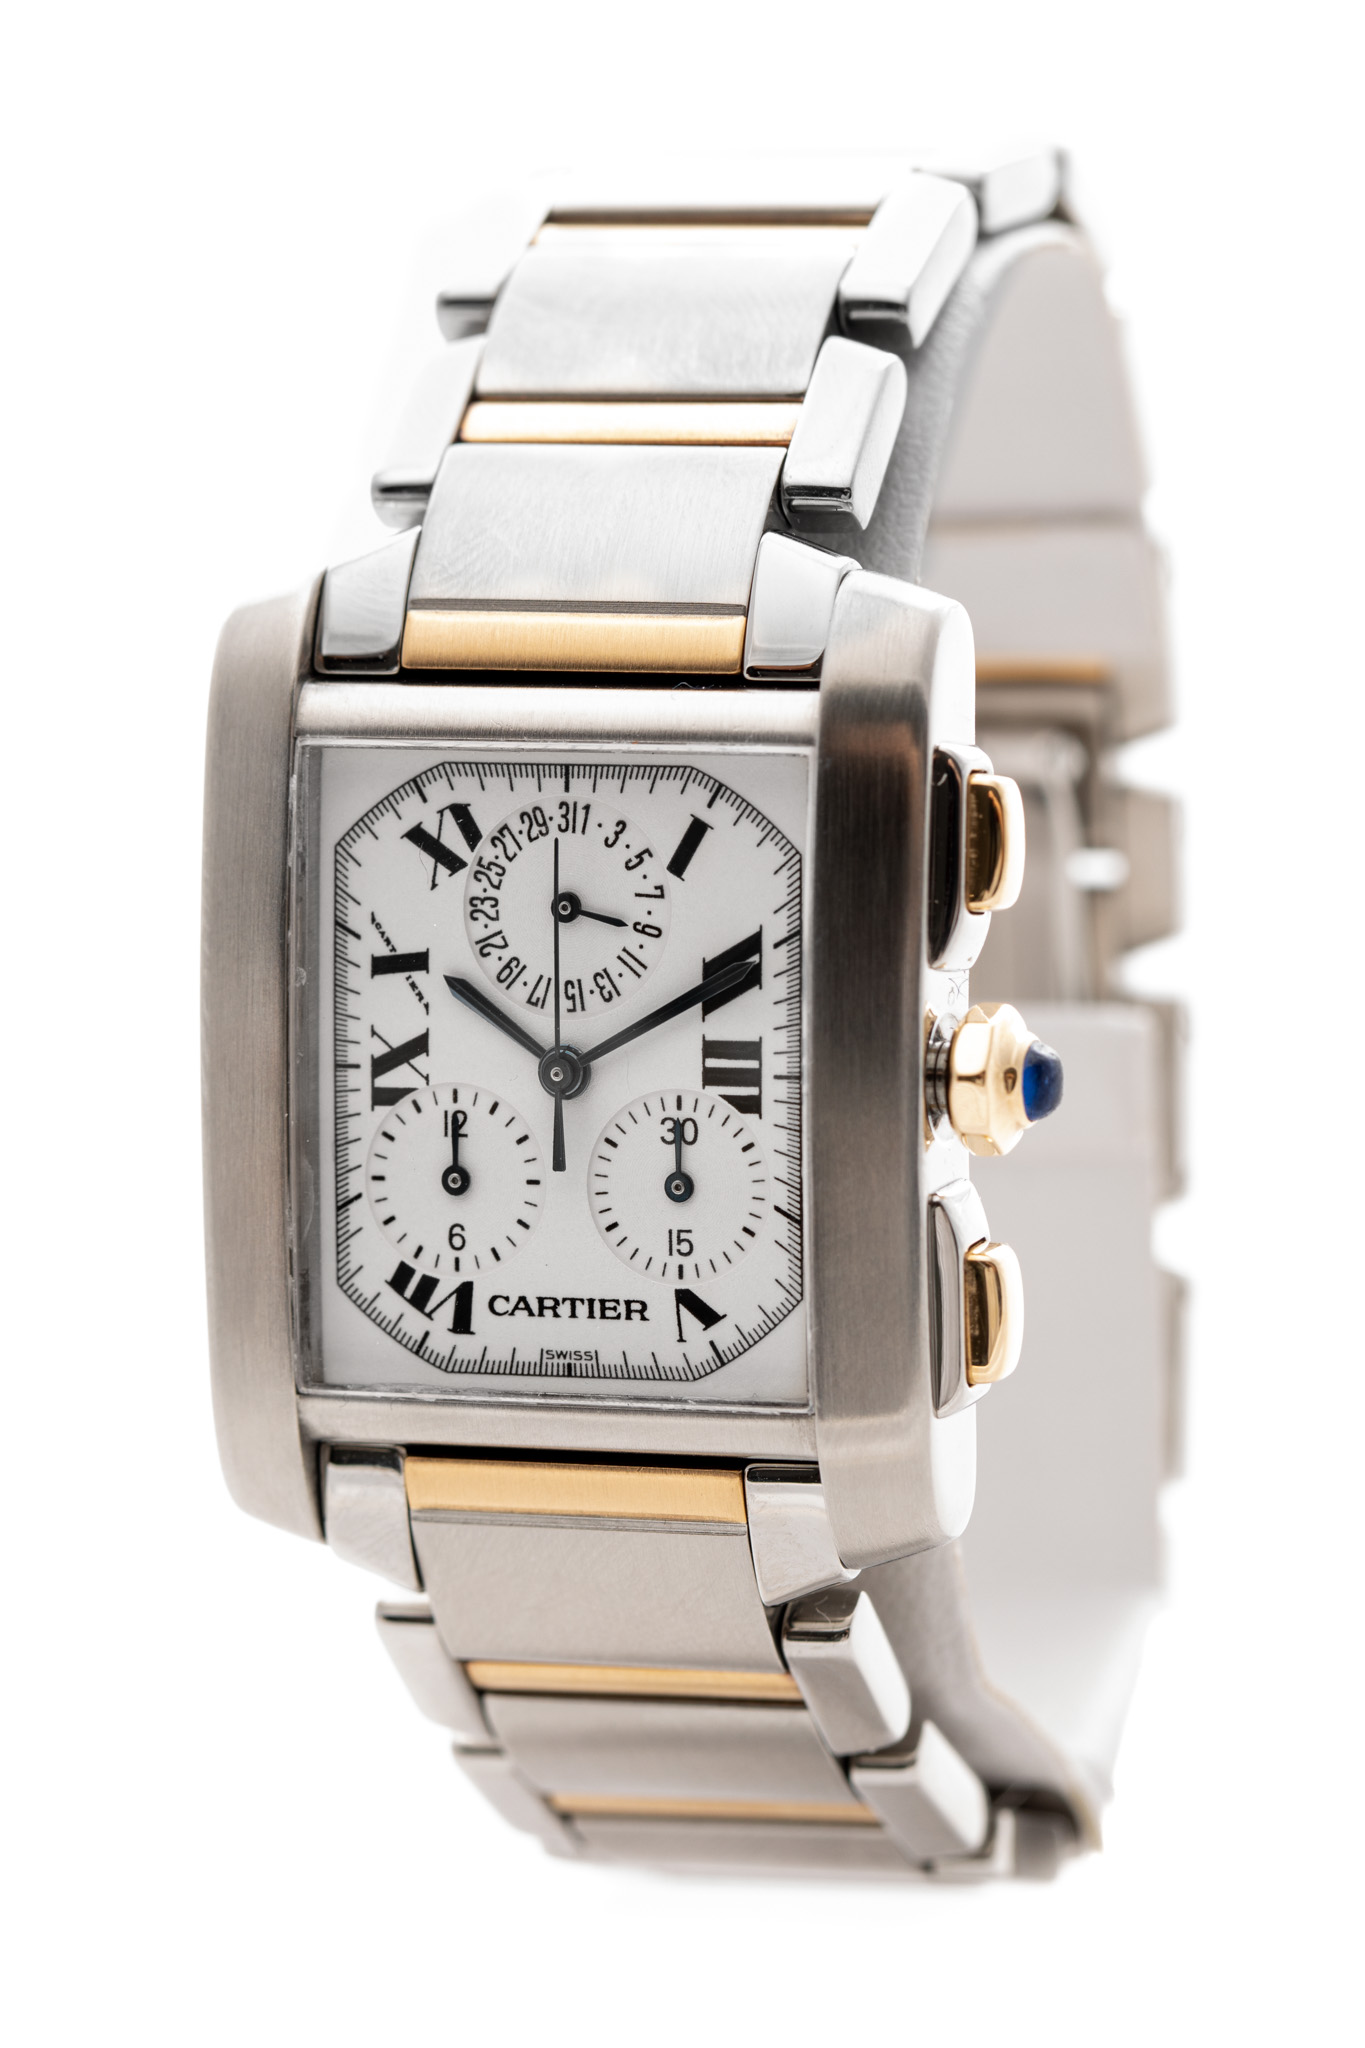 CARTIER TANK FRANCAISE CHRONOGRAPH 28x36MM 18K YELLOW GOLD&STEEL REF: 2303